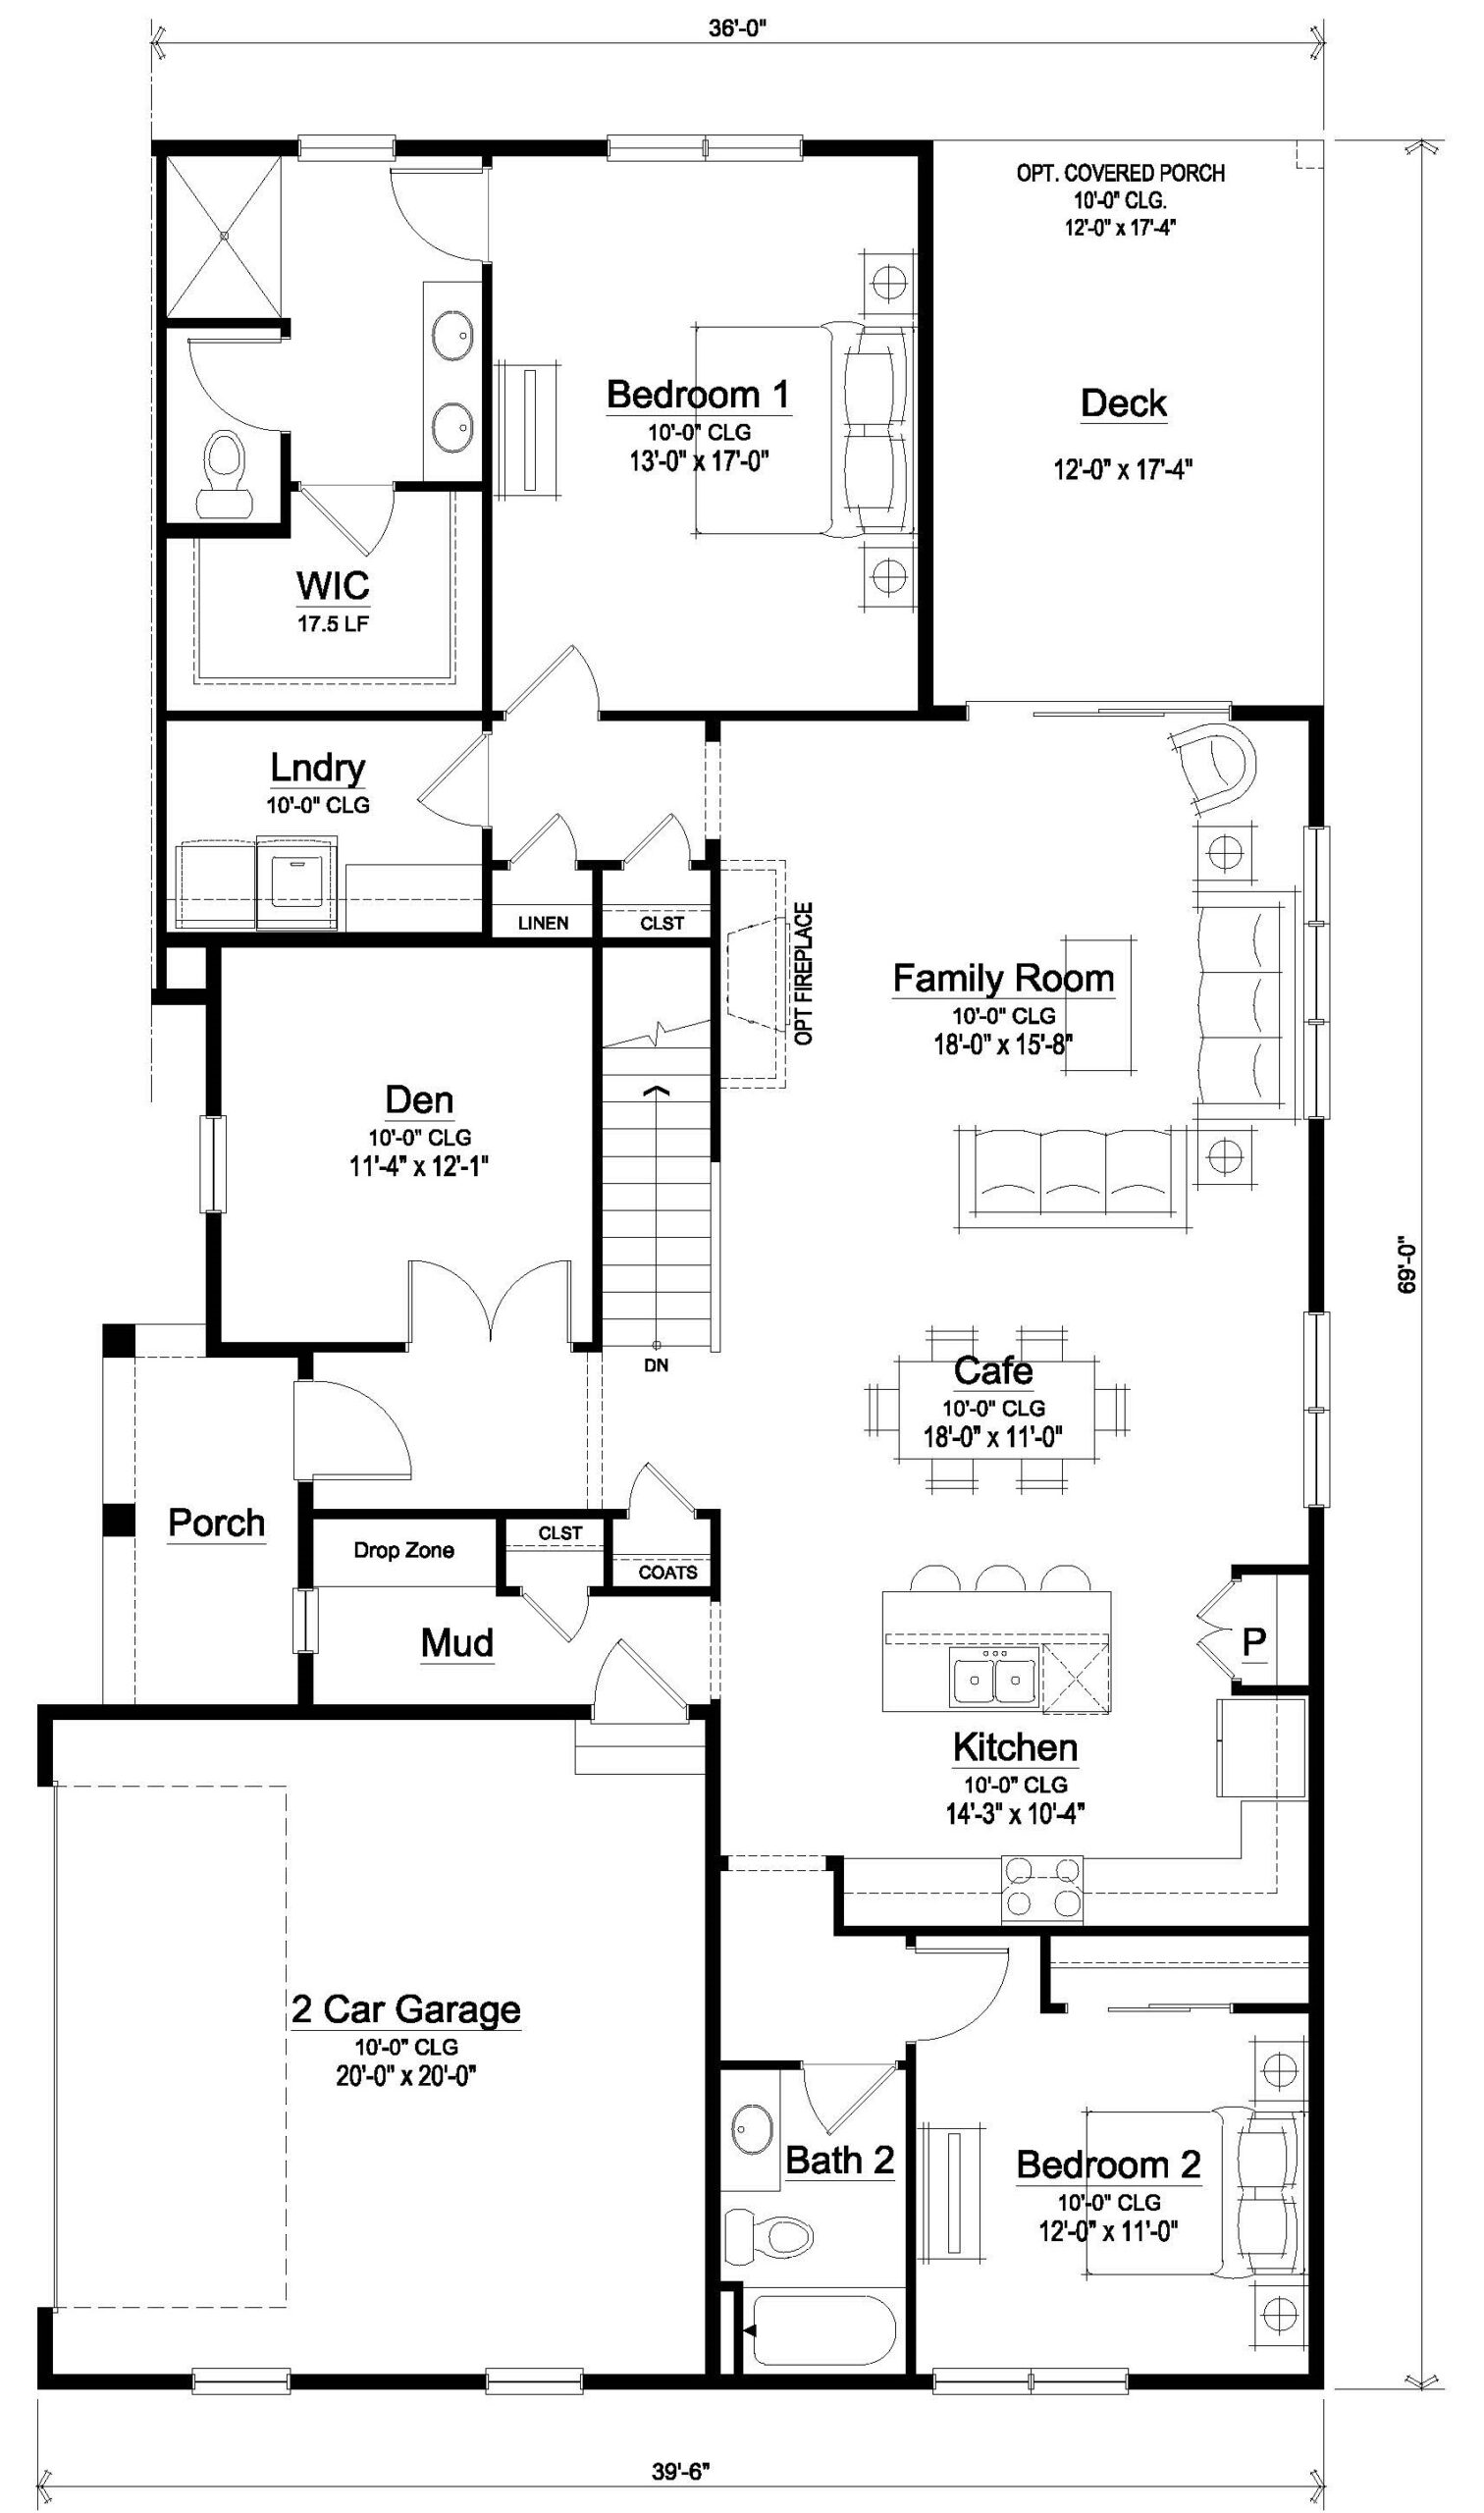 Architectural floor plan of a two-story house featuring three bedrooms, two bathrooms, a kitchen, family room, den, laundry, two-car garage, and multiple porches.